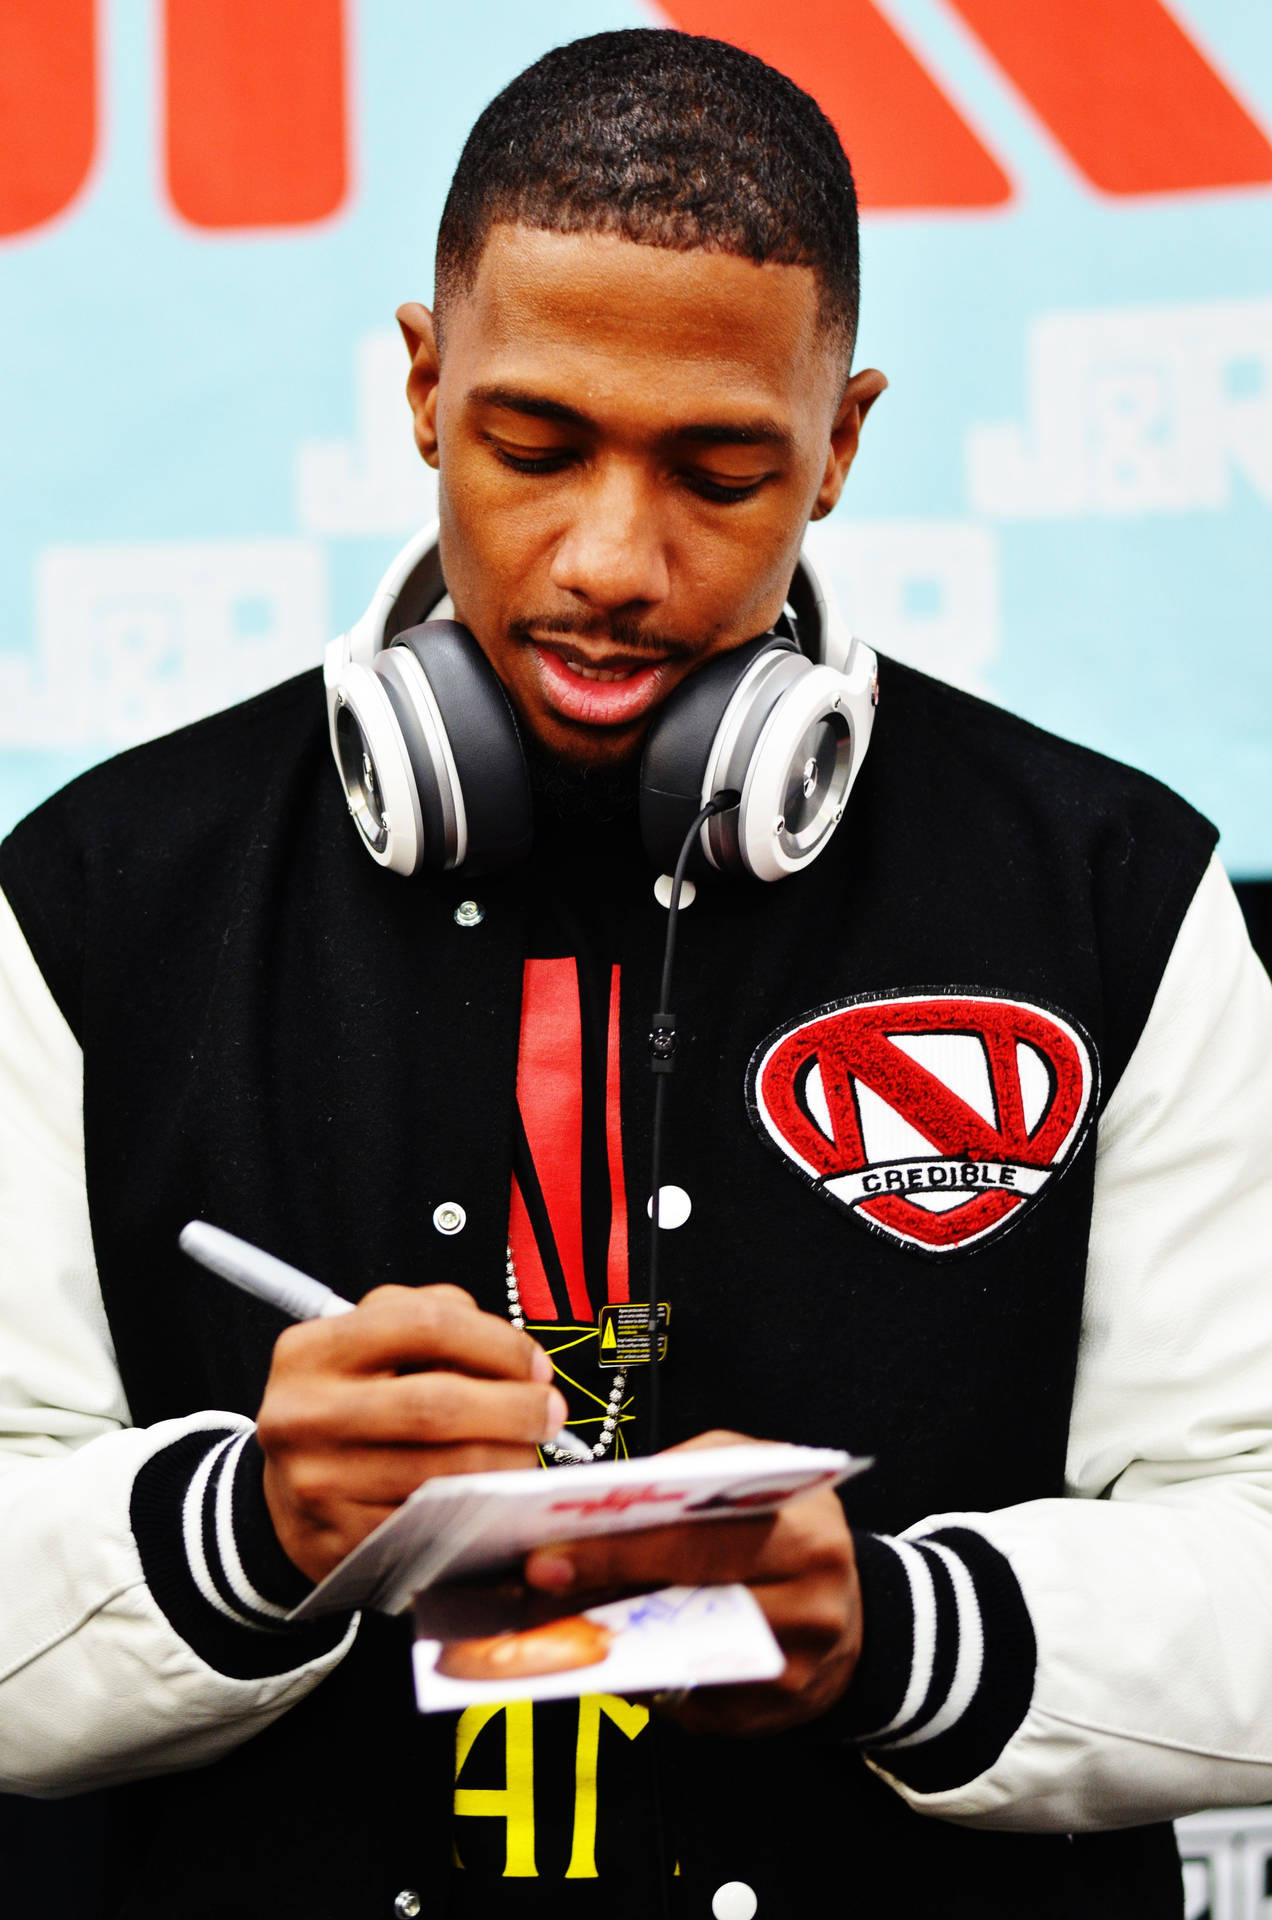 Nick Cannon Signing Autographs